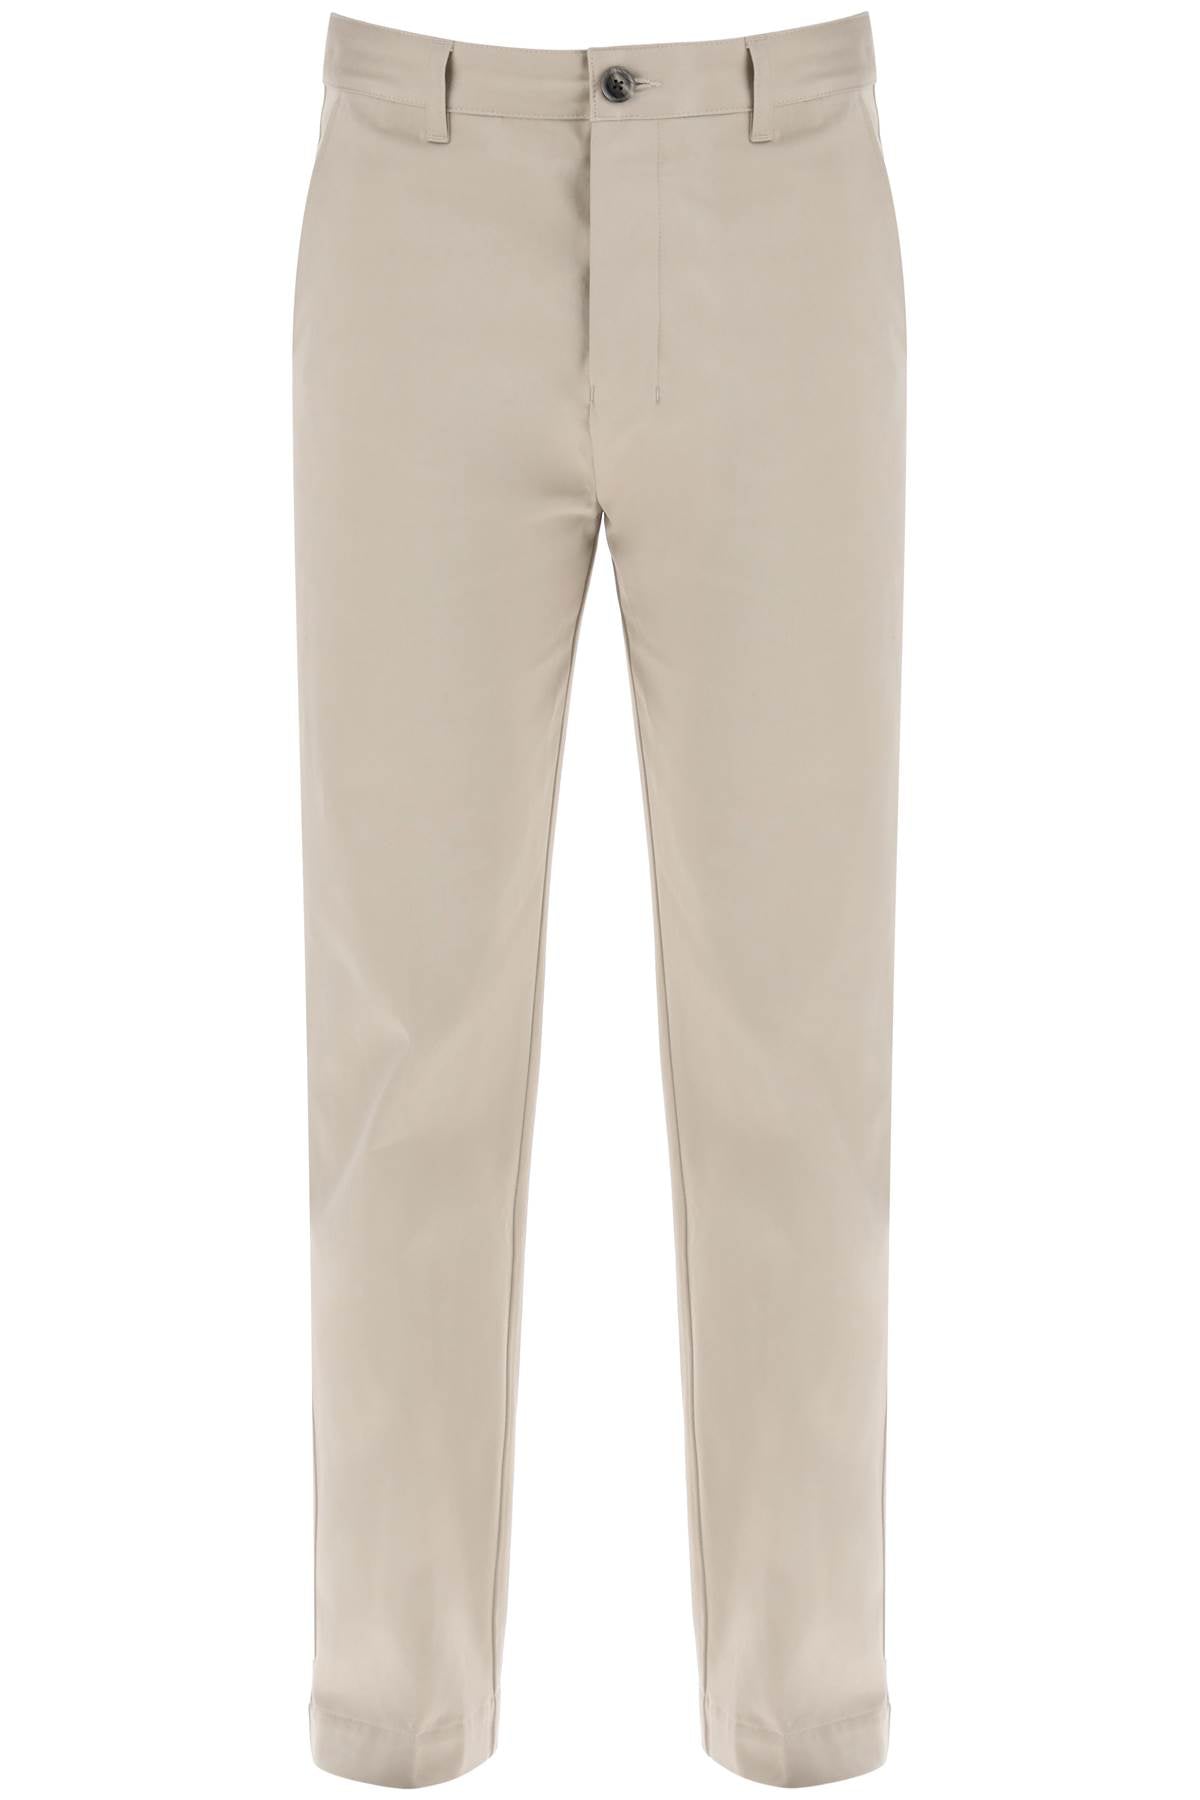 cotton satin chino pants in HTR005 CO0009 BEIGE CLAIR